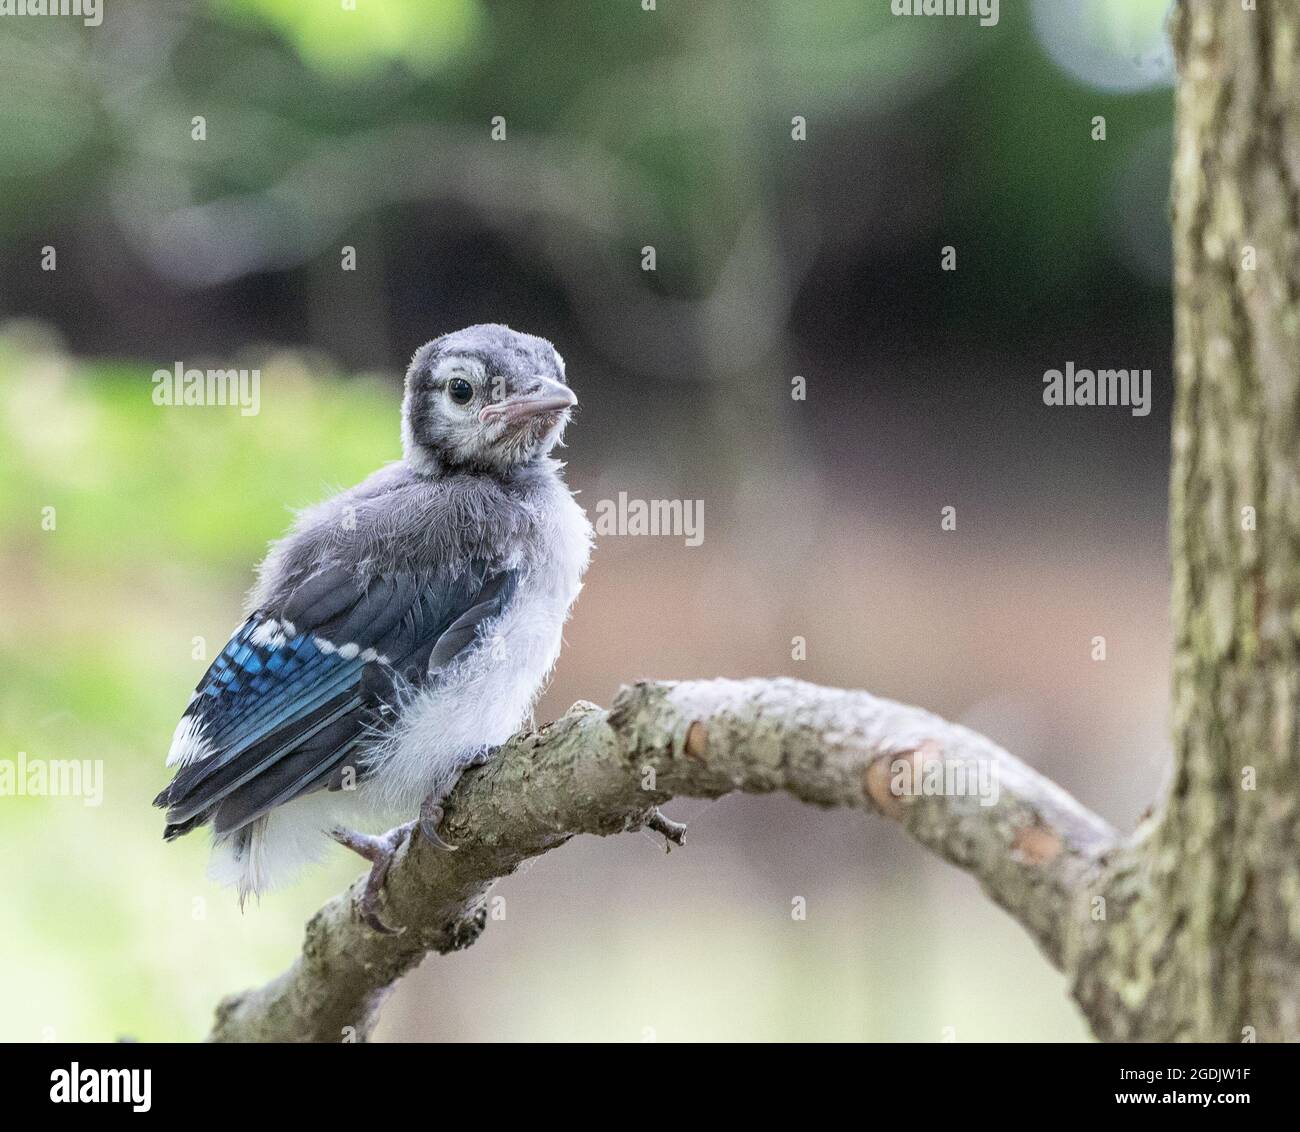 Bluejay baby perched on branch. Stock Photo